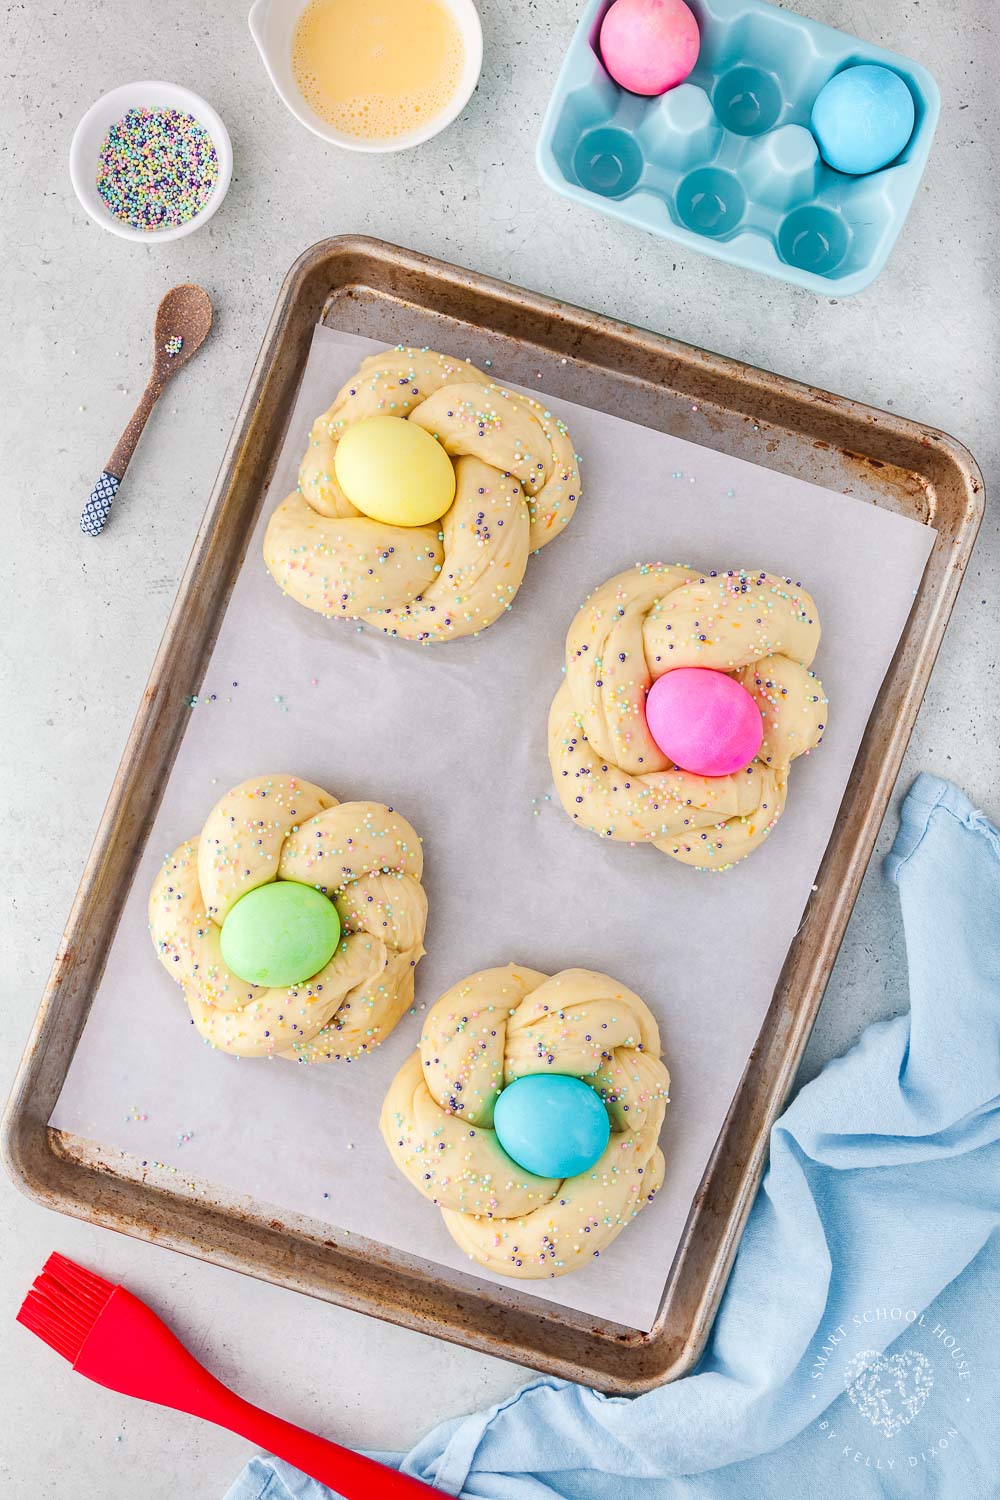 Braided dough with sprinkles and an Easter egg